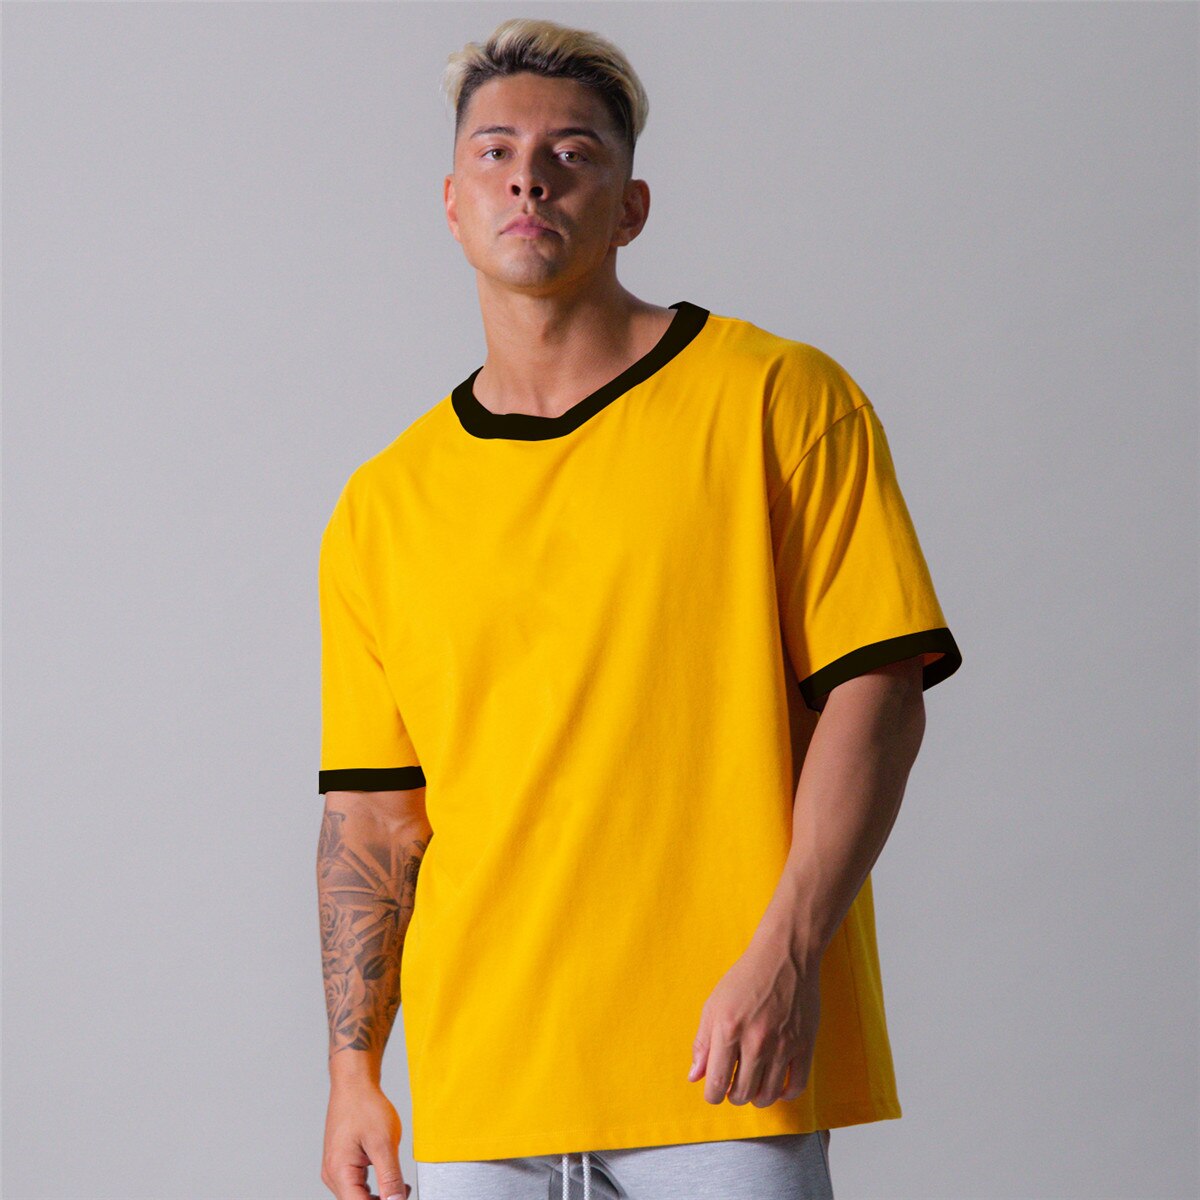 Fashion Casual Loose T-shirt Men Cotton Fitness Workout Short Sleeve Shirt Male Gym Sports Tee Tops Summer Training Clothing